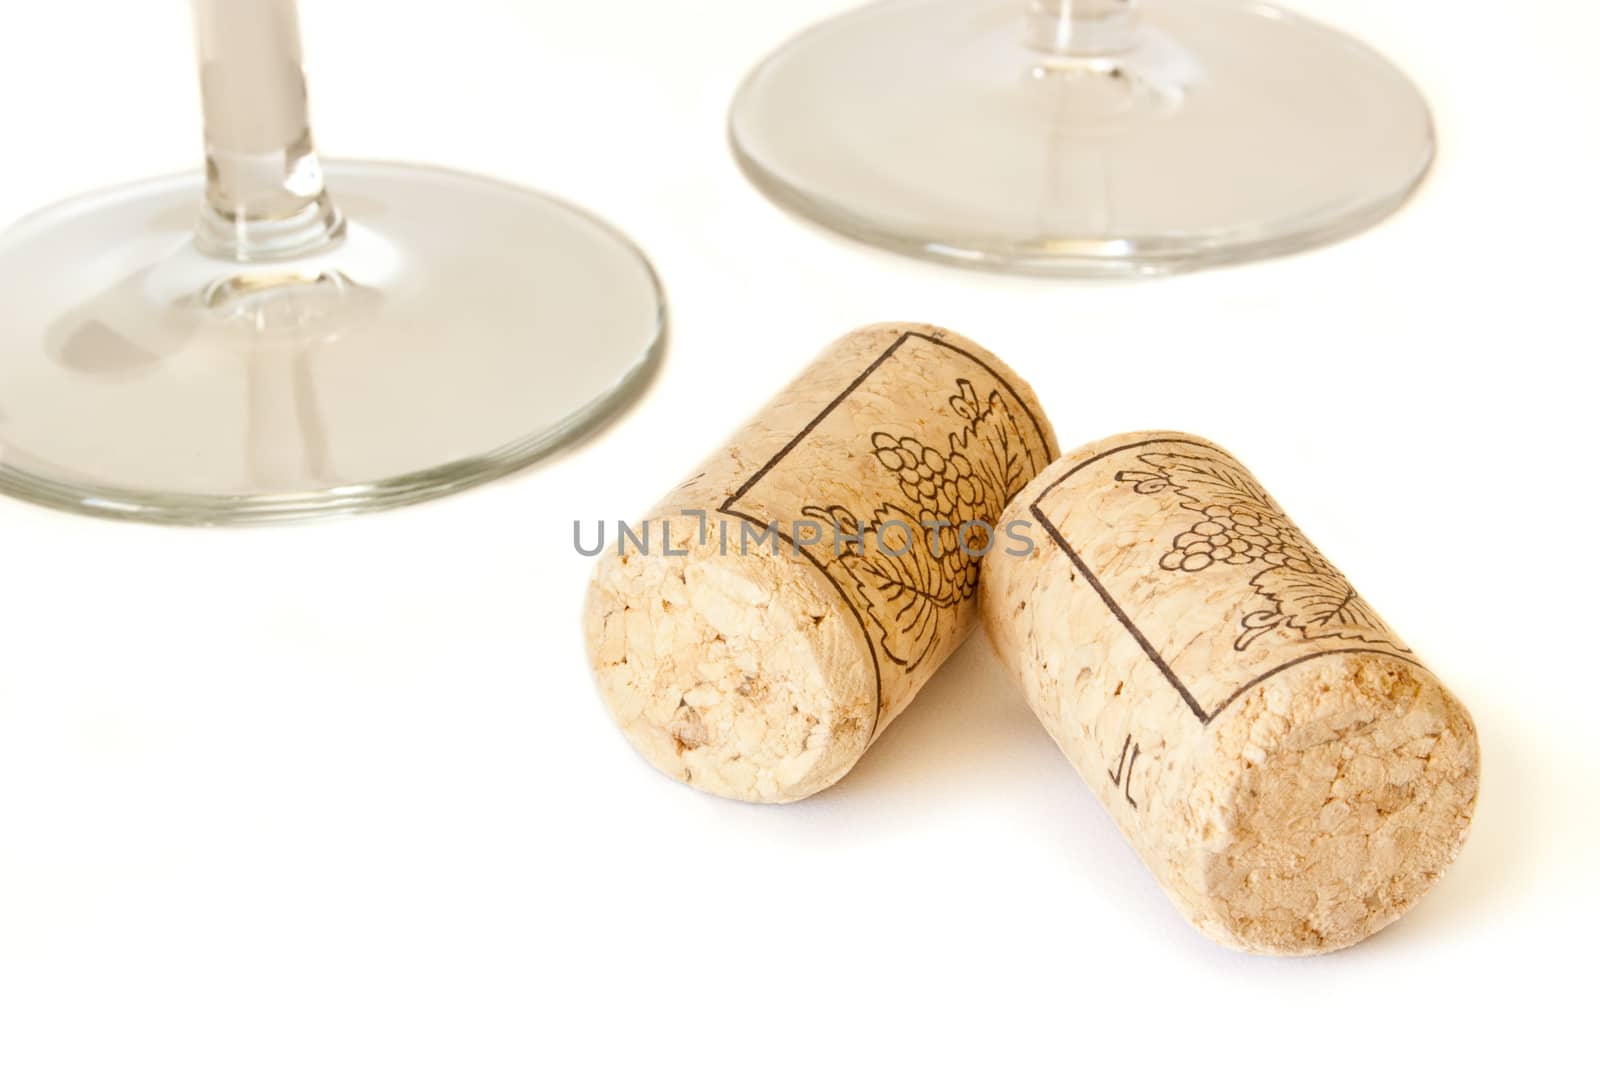 Wine cork and two wine glasses isolated on white background